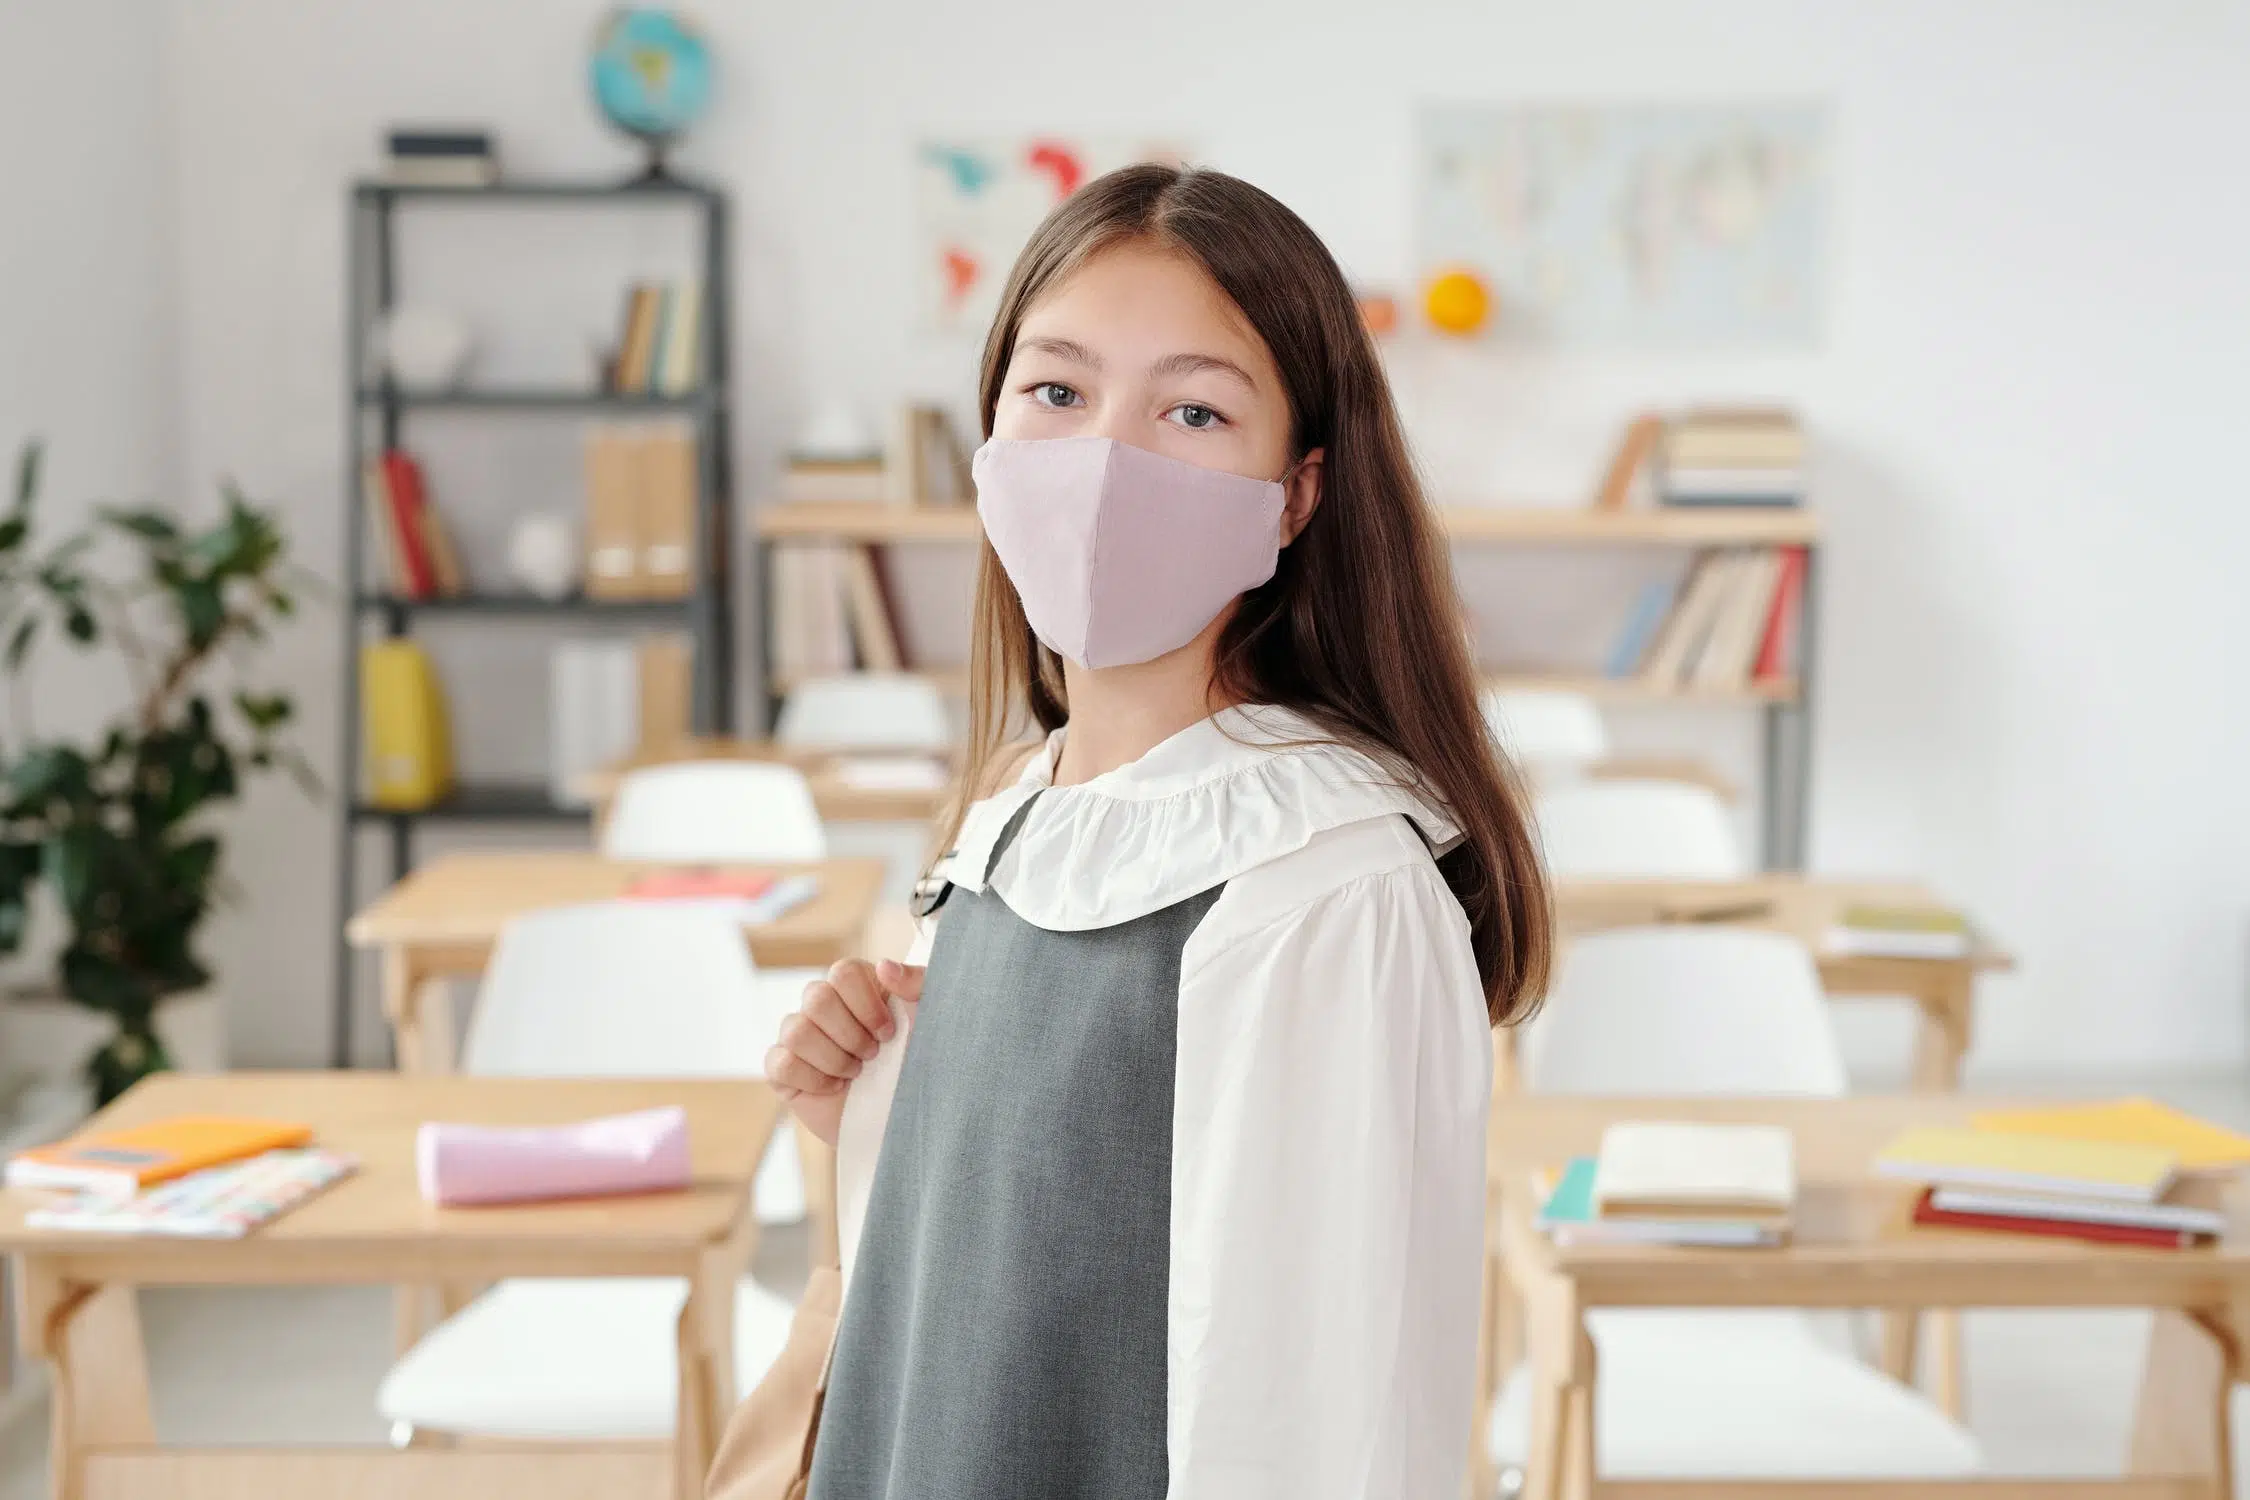 Doctors' group wants kids to keep wearing masks in class